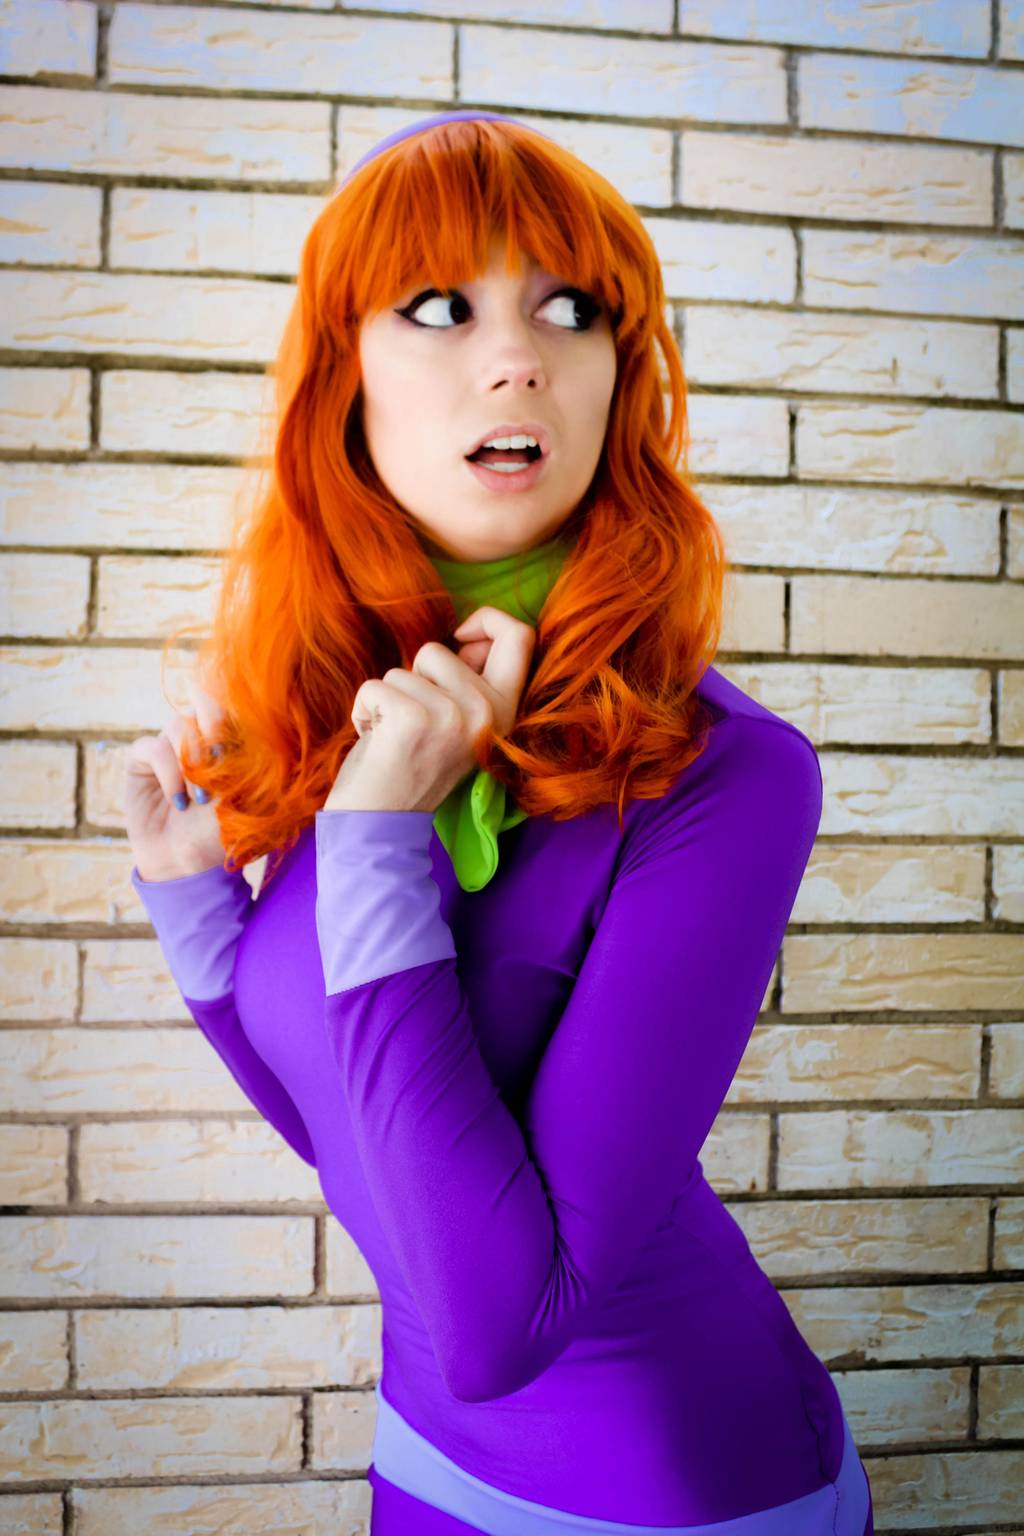 70+ Hot Pictures Of Daphne Blake From Scooby Doo Which Are Sure to Catch Your Attention 104